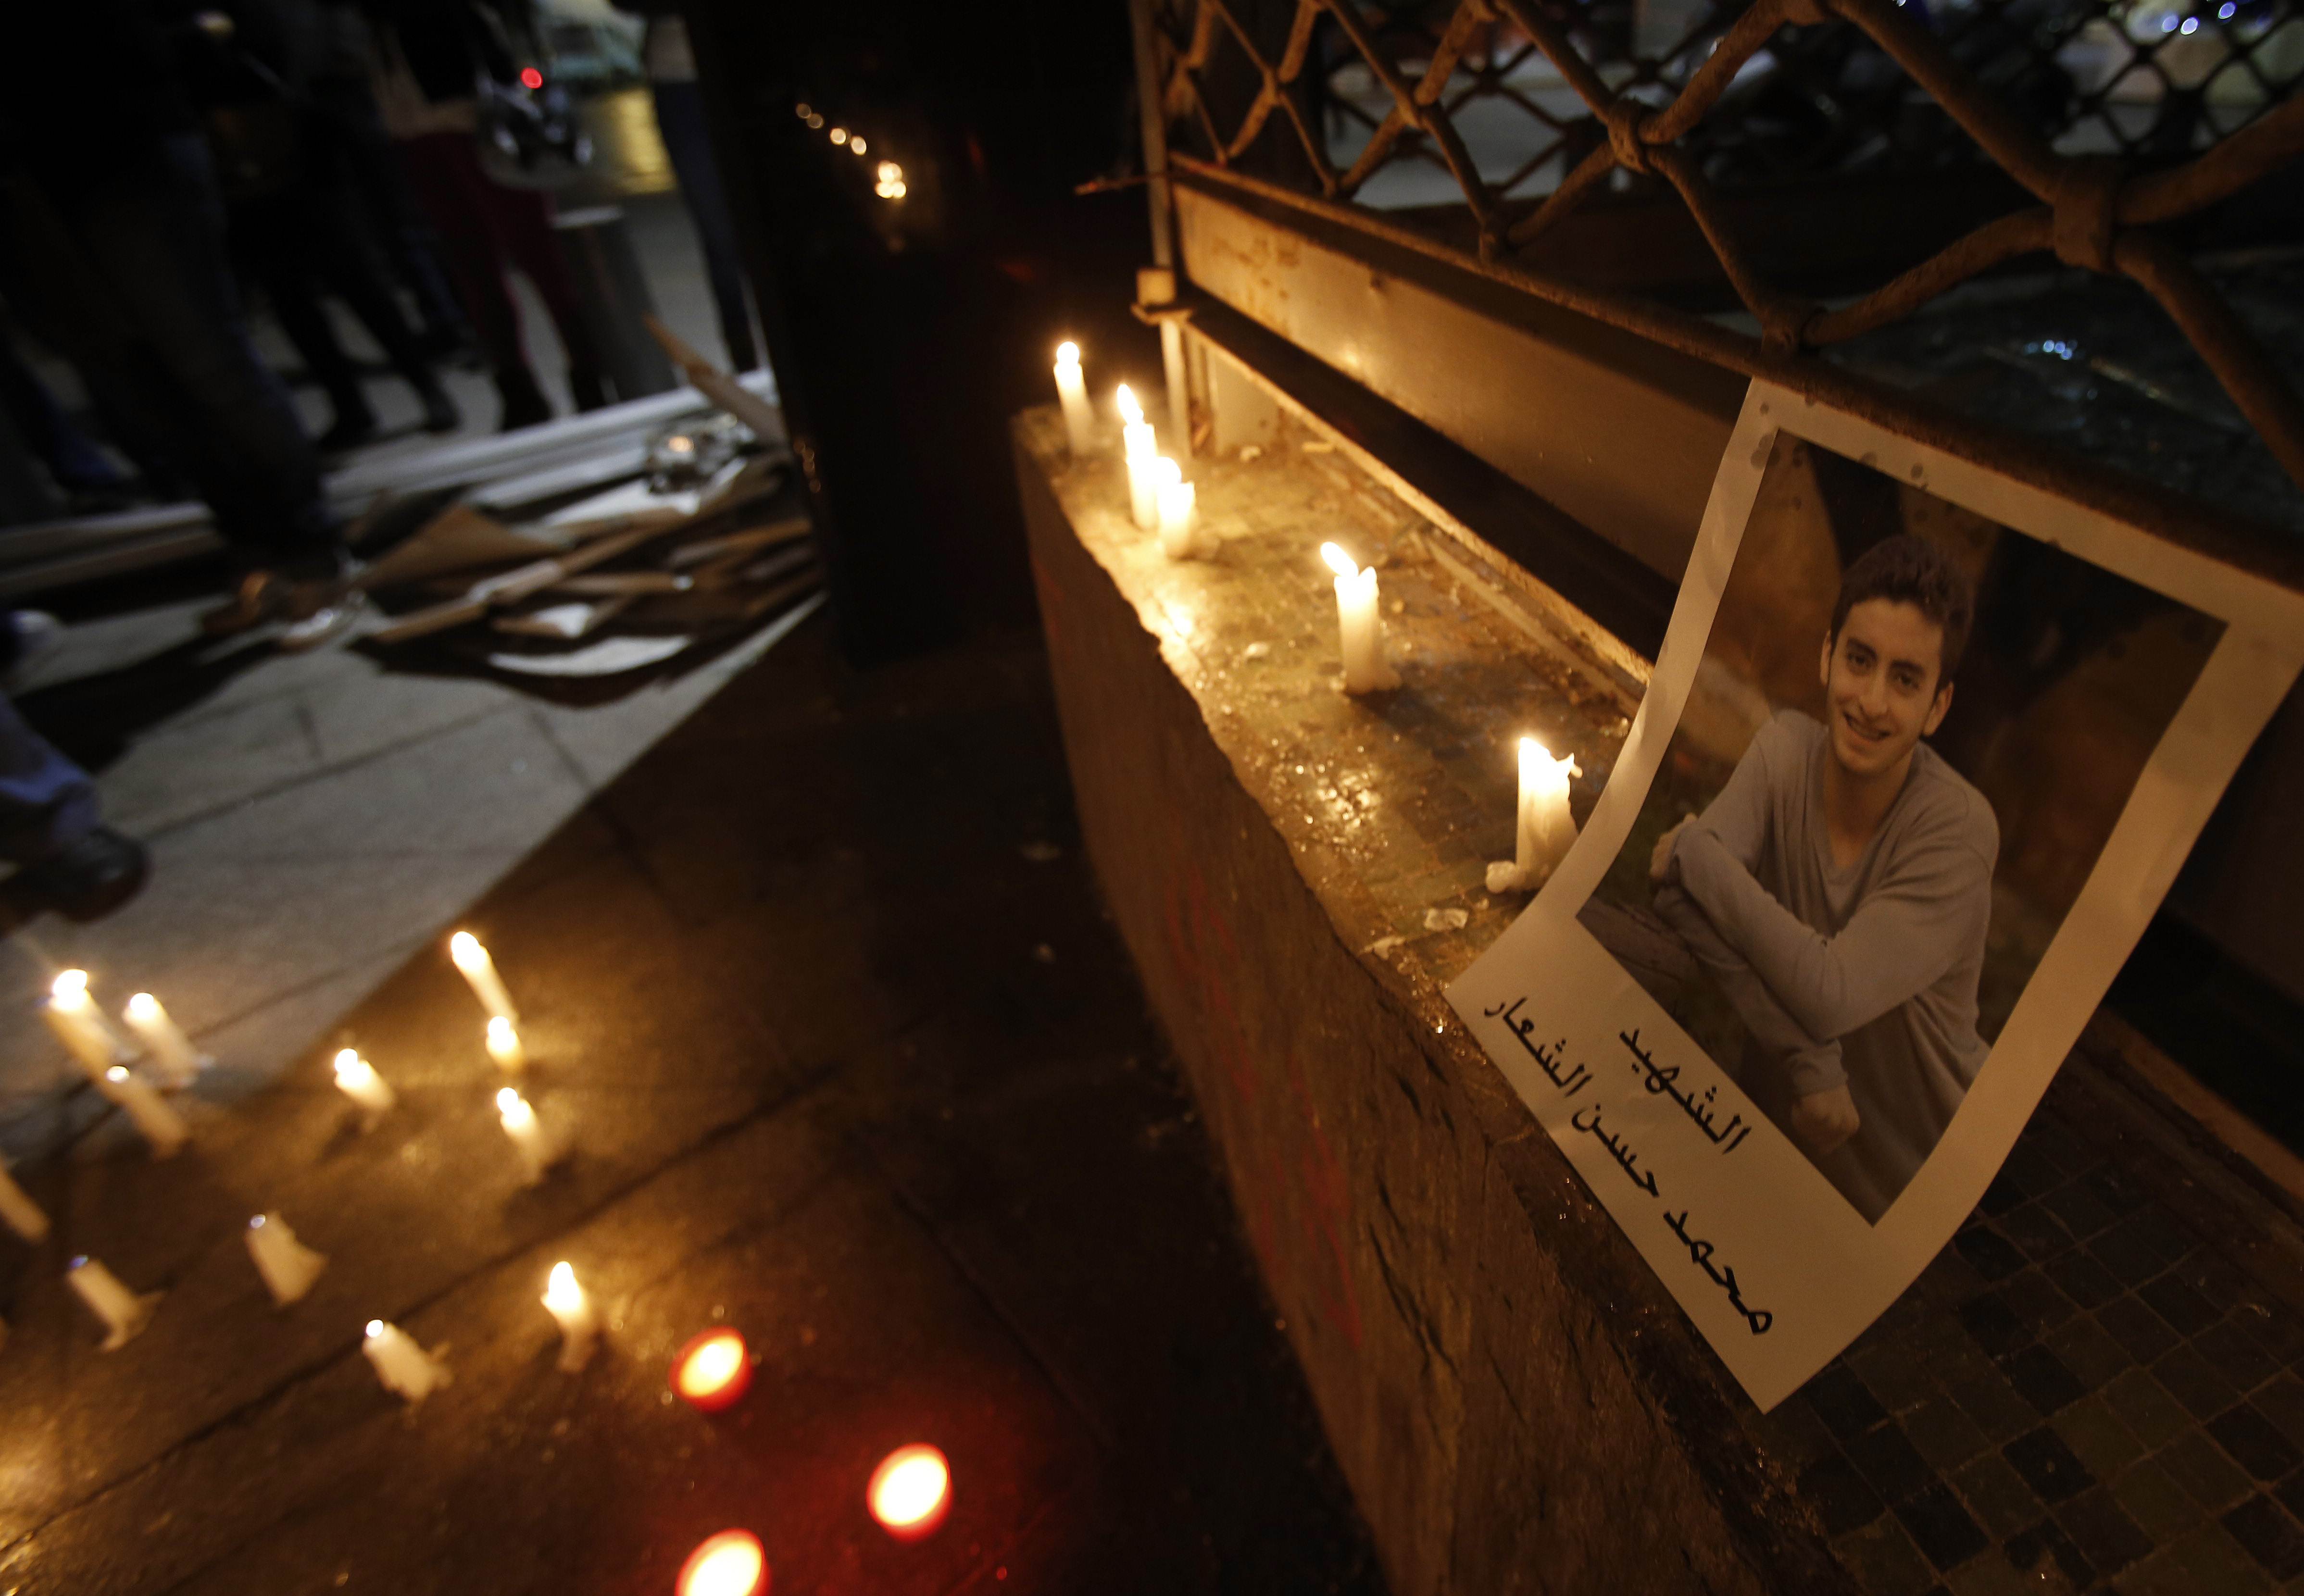  A portrait of 16-year-old Mohammad al-Chaar is seen during a candle-light vigil at the site of a car bomb that targeted former finance minister, Mohamed Chatah (Shatah), in Beirut on December 28, 2013. Photo: AFP